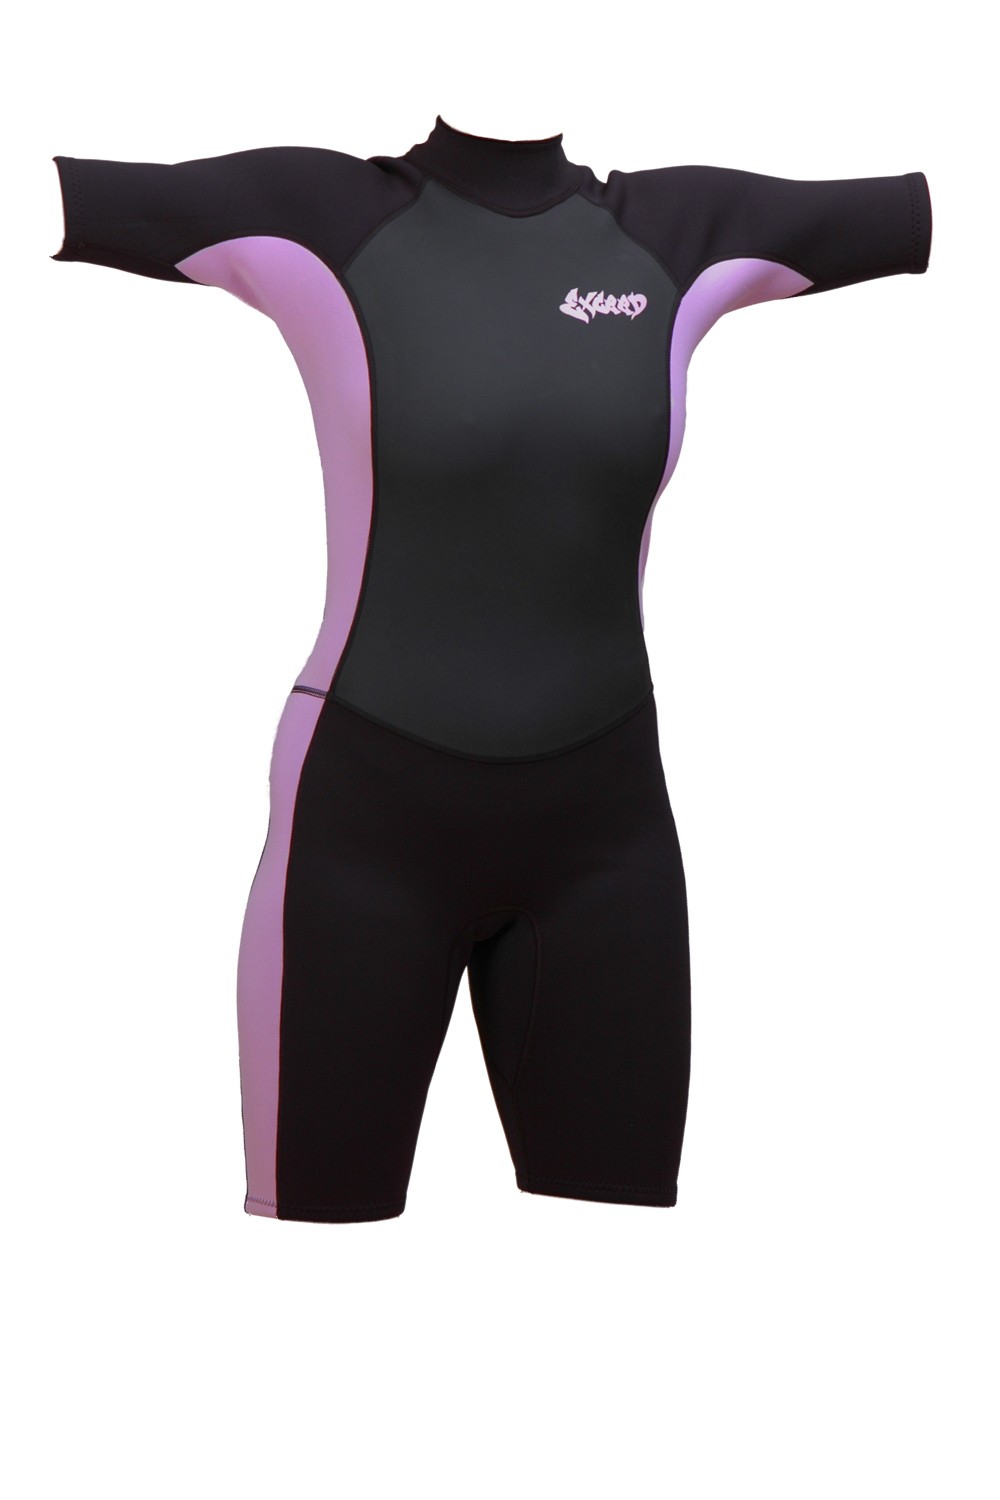 Exceed Evolution Womens 3/2mm Shorty Wetsuit